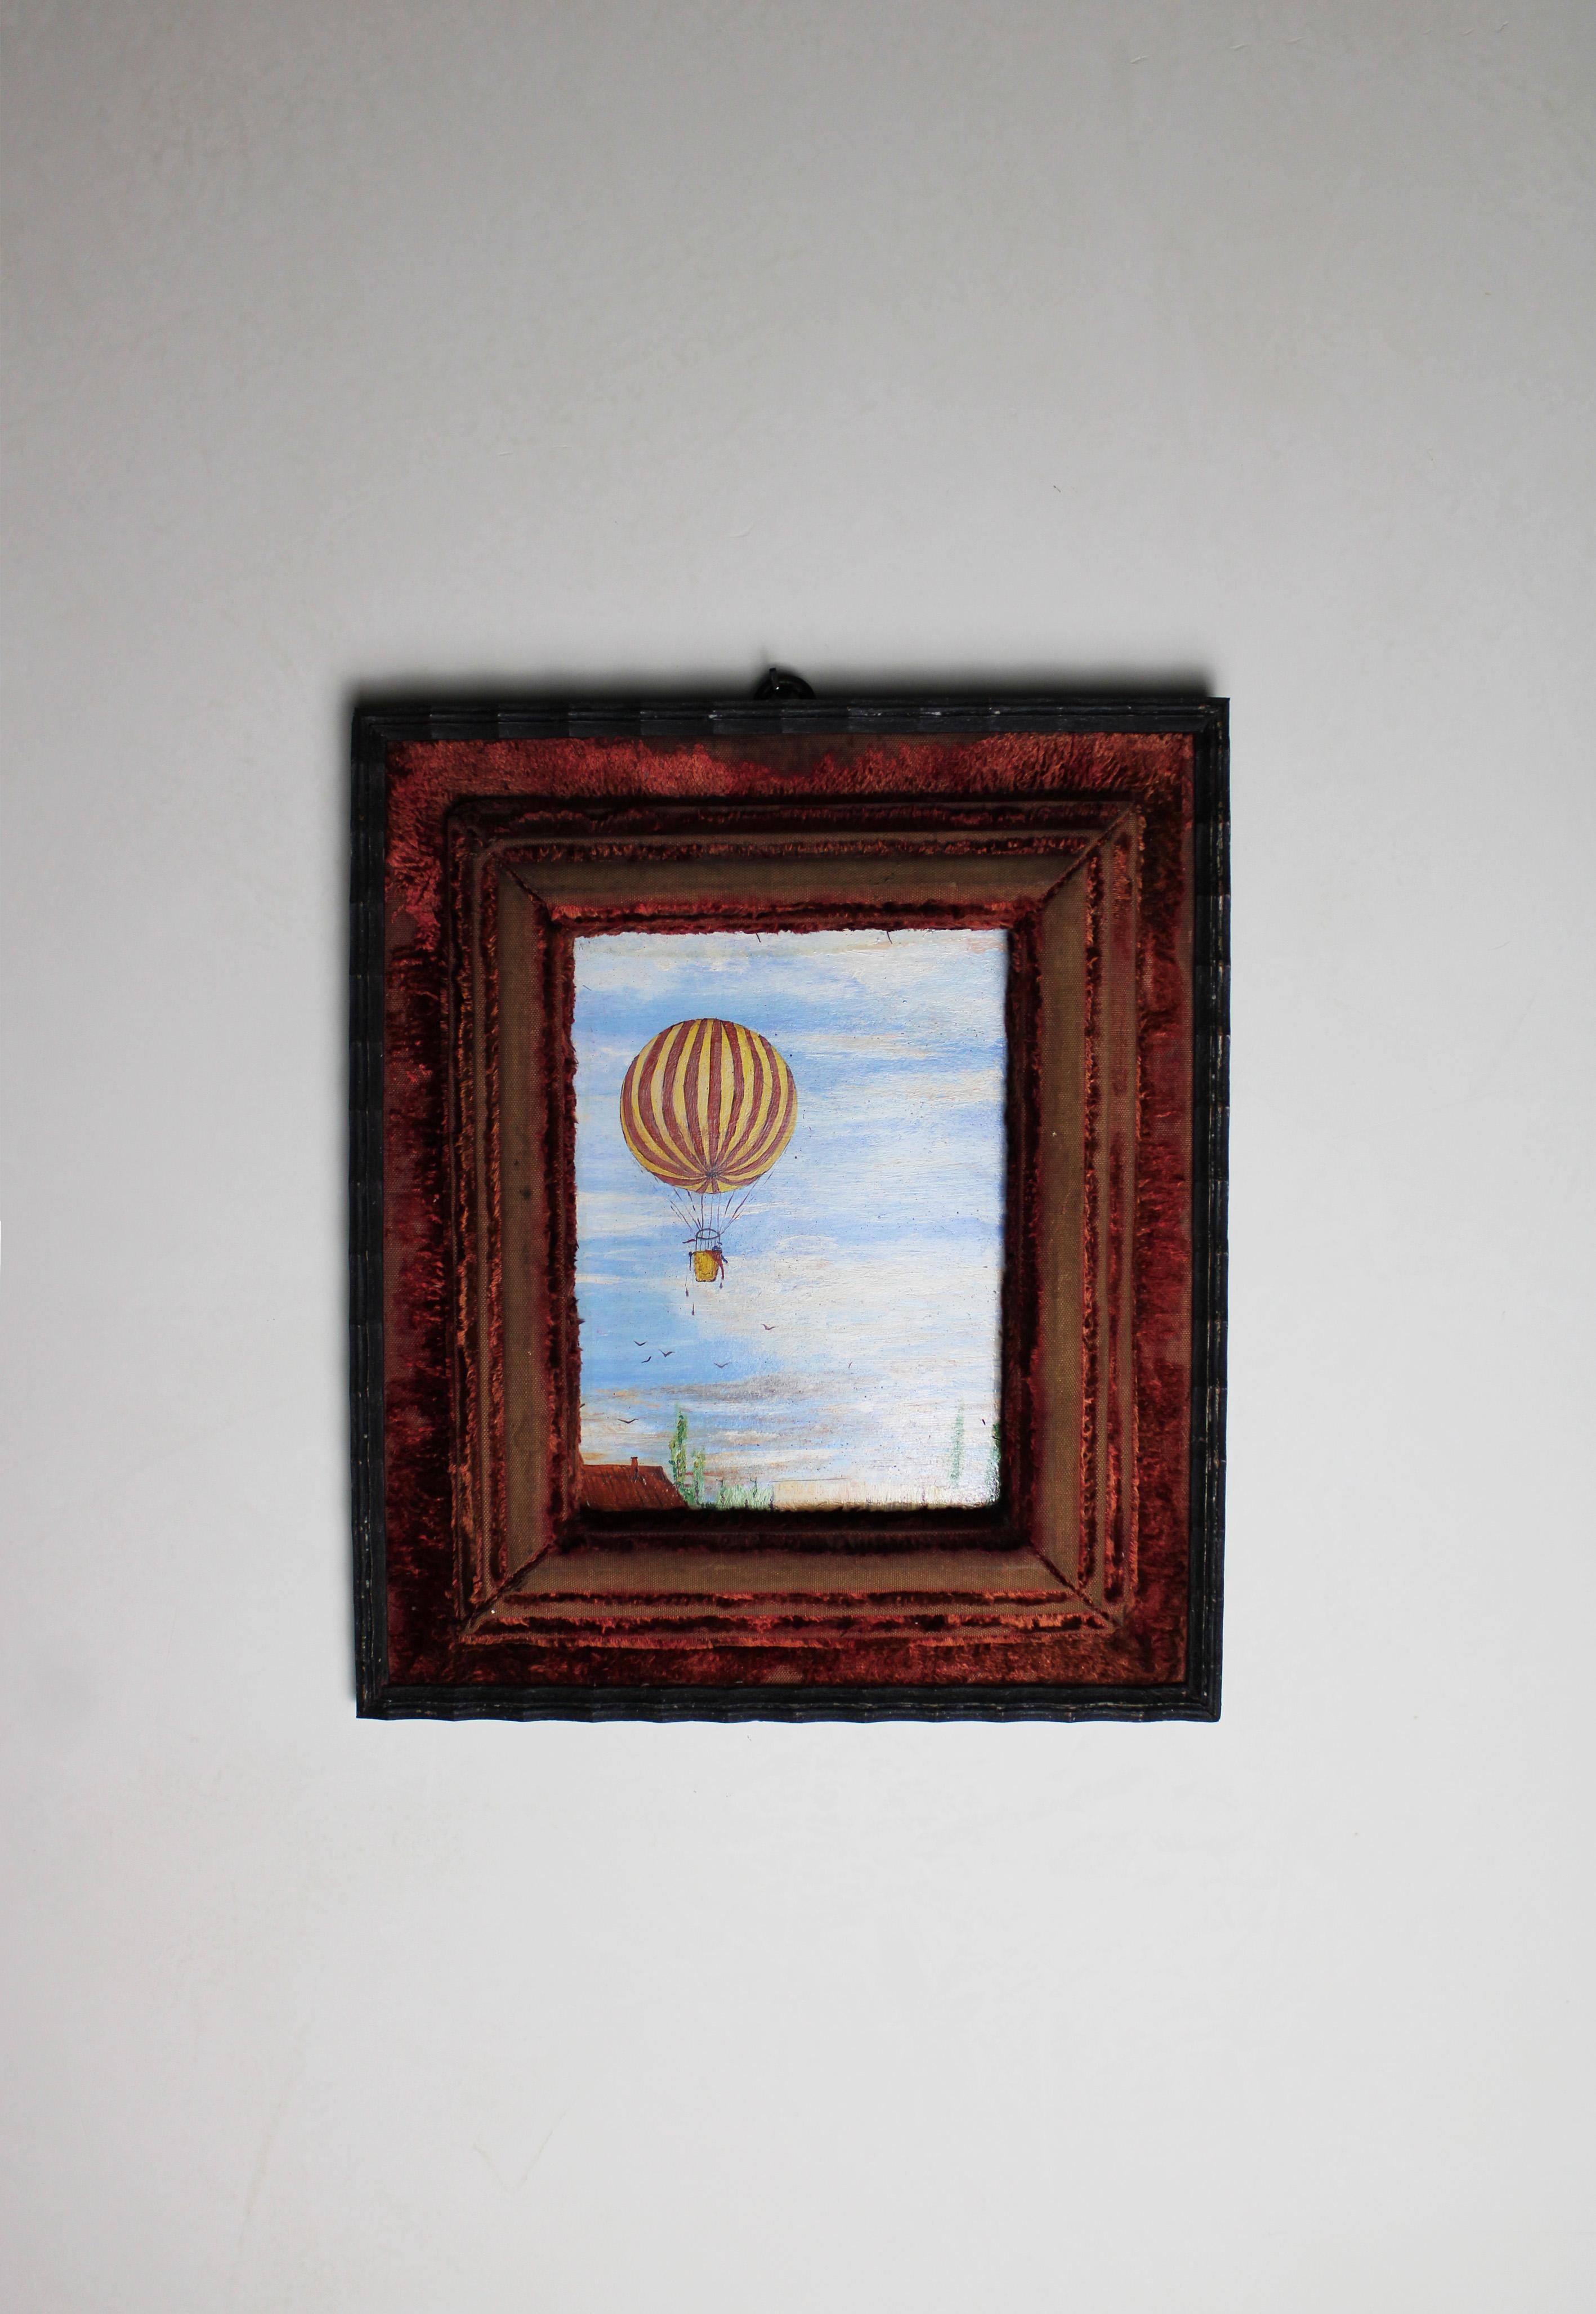 Post-Modern 20th Century Painting “Hot air balloon” Red frame Signed AVD Borght Belgium For Sale